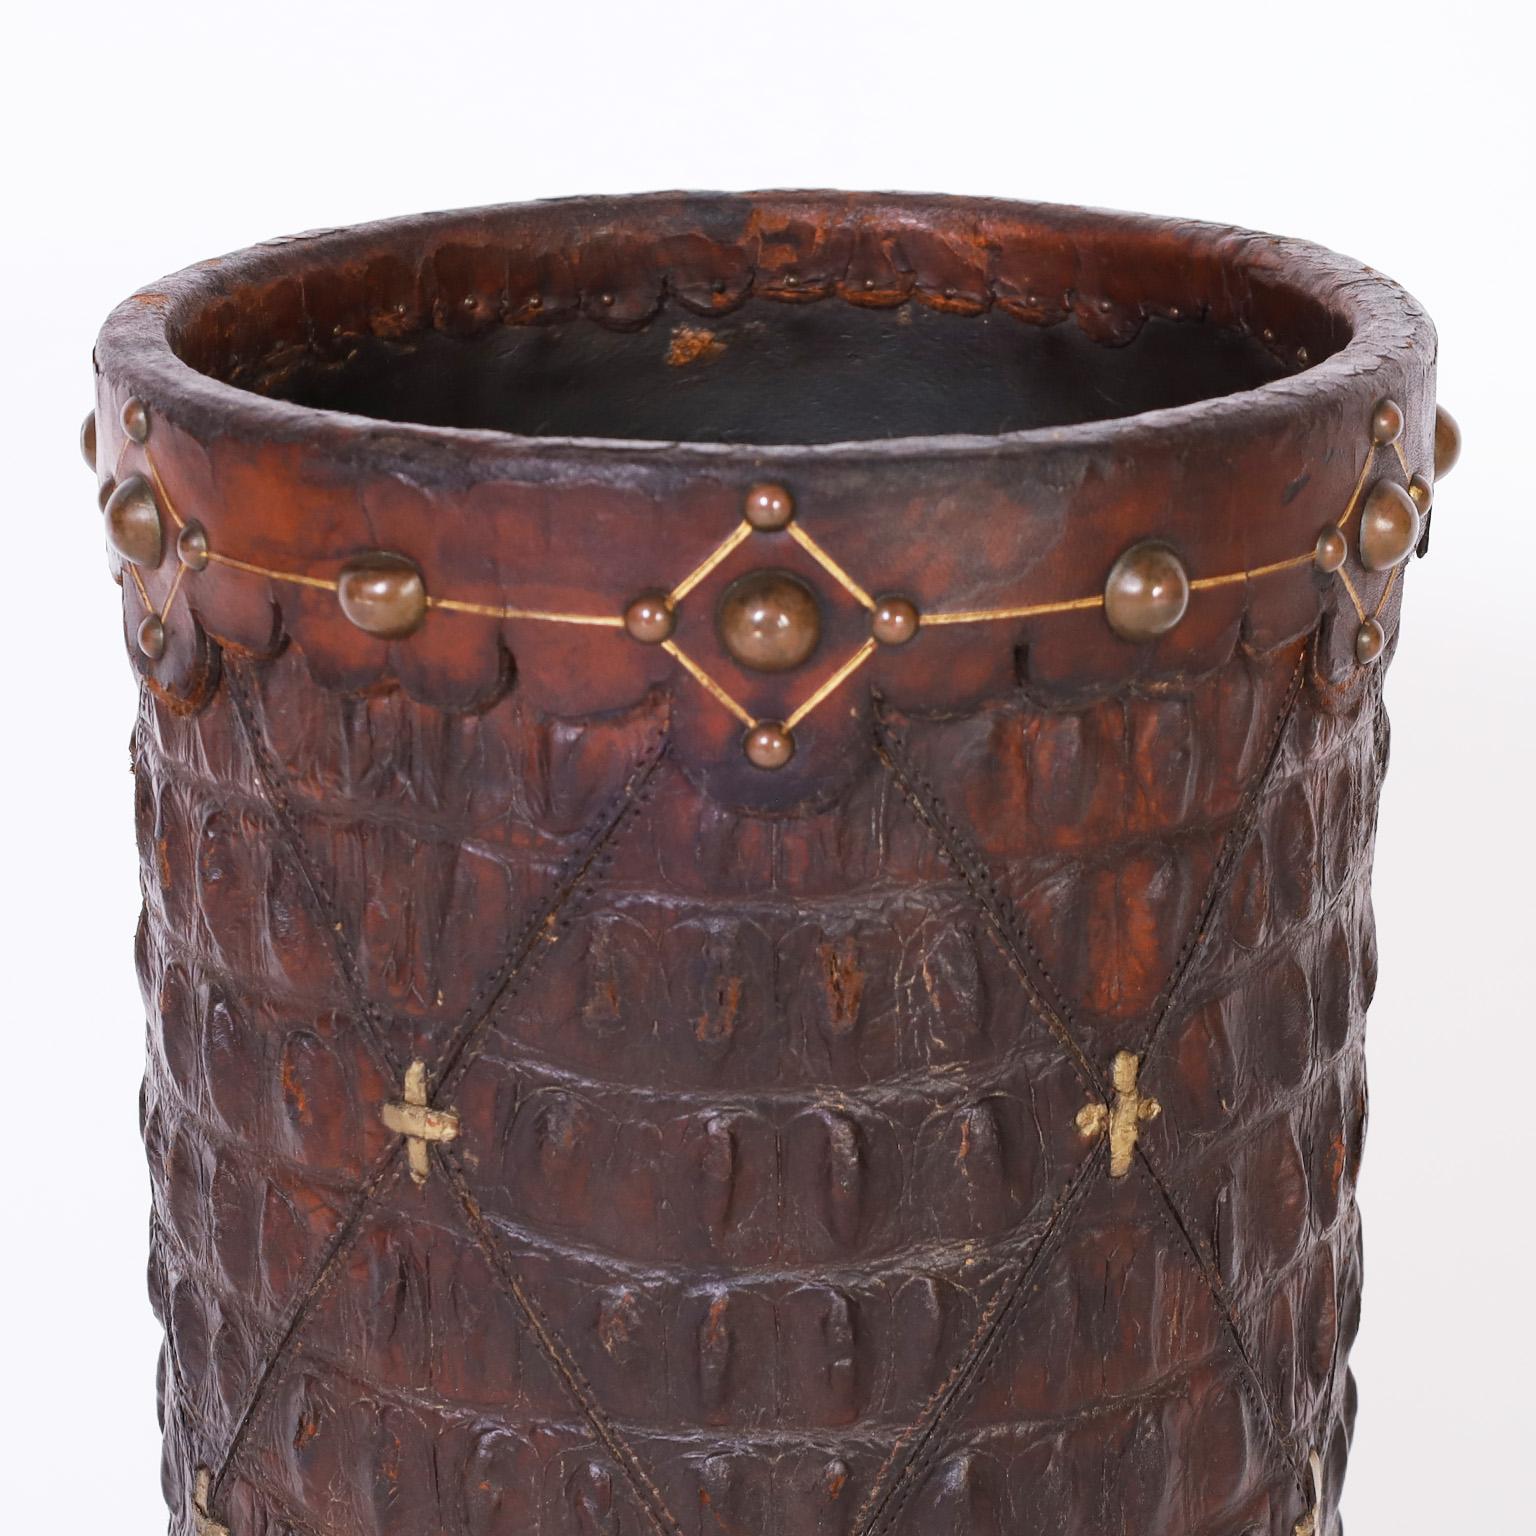 Hand-Crafted French Alligator Bin or Canister